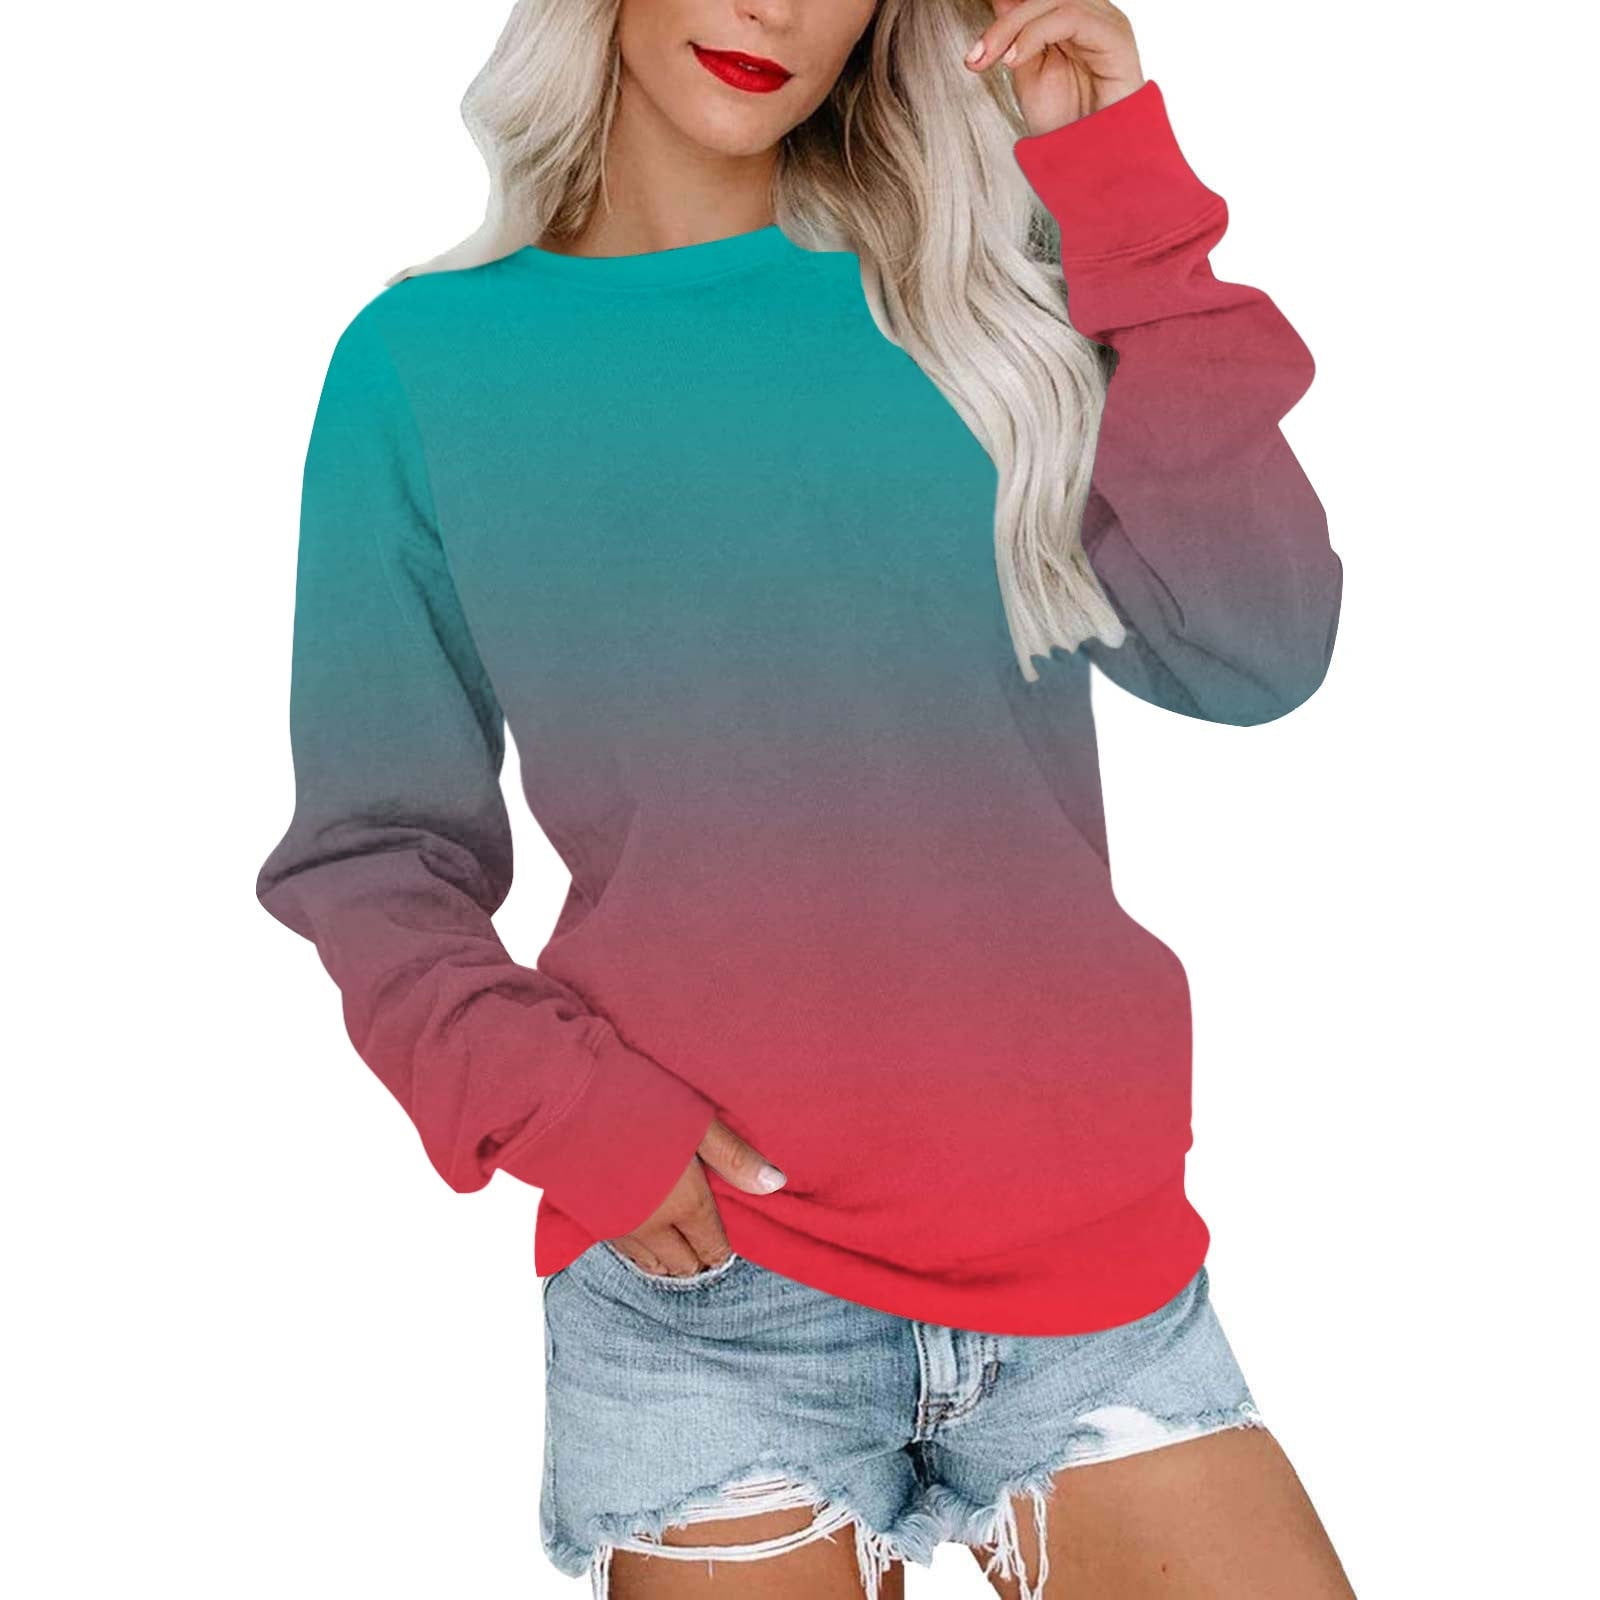 overstock items clearance all prime,Womens Oversized Sweatshirts Pullover  Casual Crewneck Long Sleeve Tops Comfy,Womens Casual Tops Loose Fit